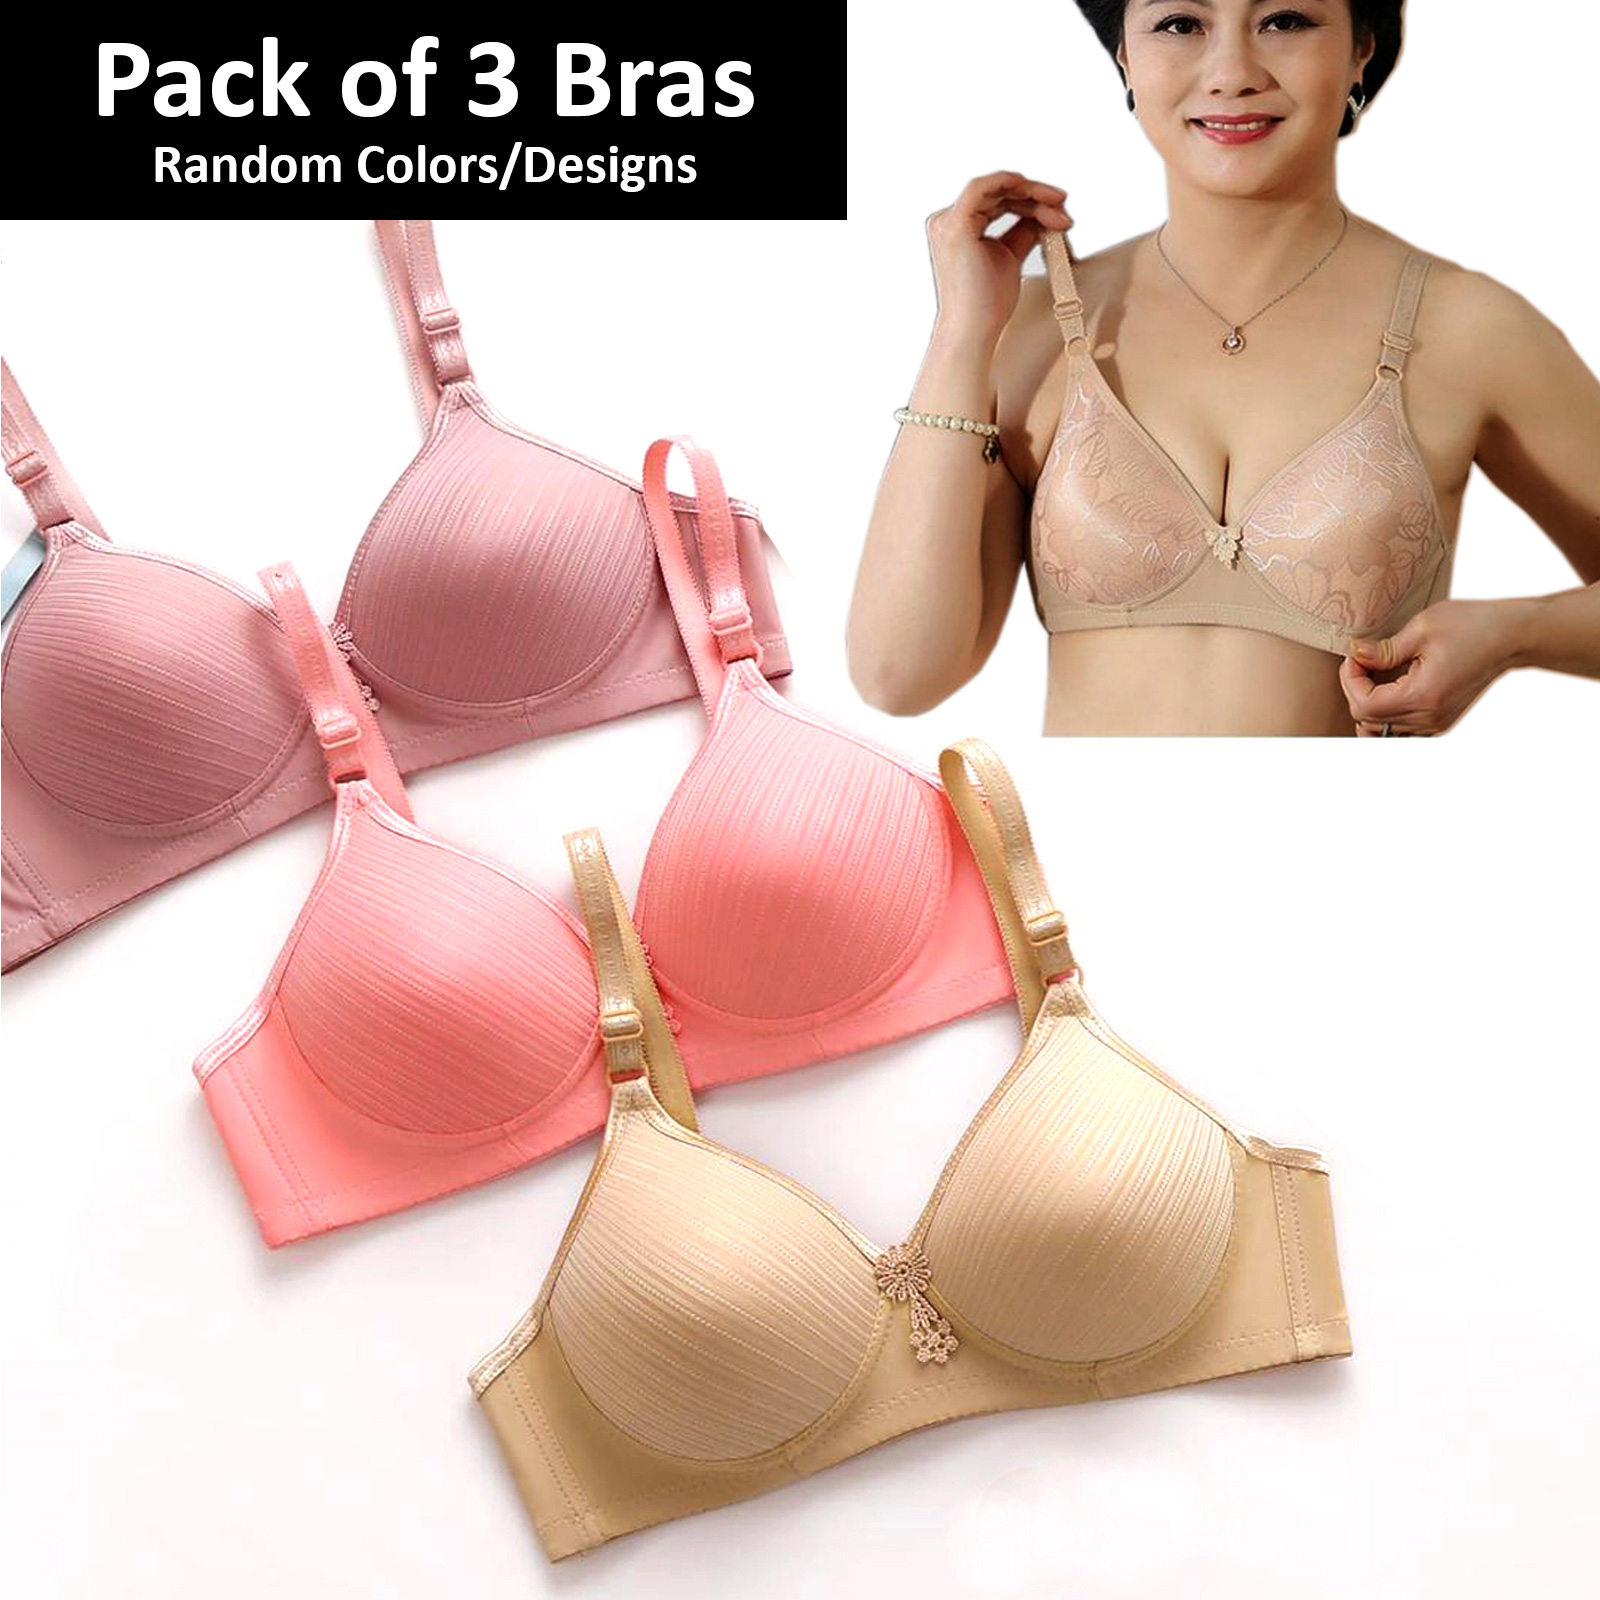 Pack of 3 Padded Bras for Women Random Colors Foam Bra for Girls Fits A Cup  and B-Cups Wireless Brassiere for Casual Undergarments 30-36 Size